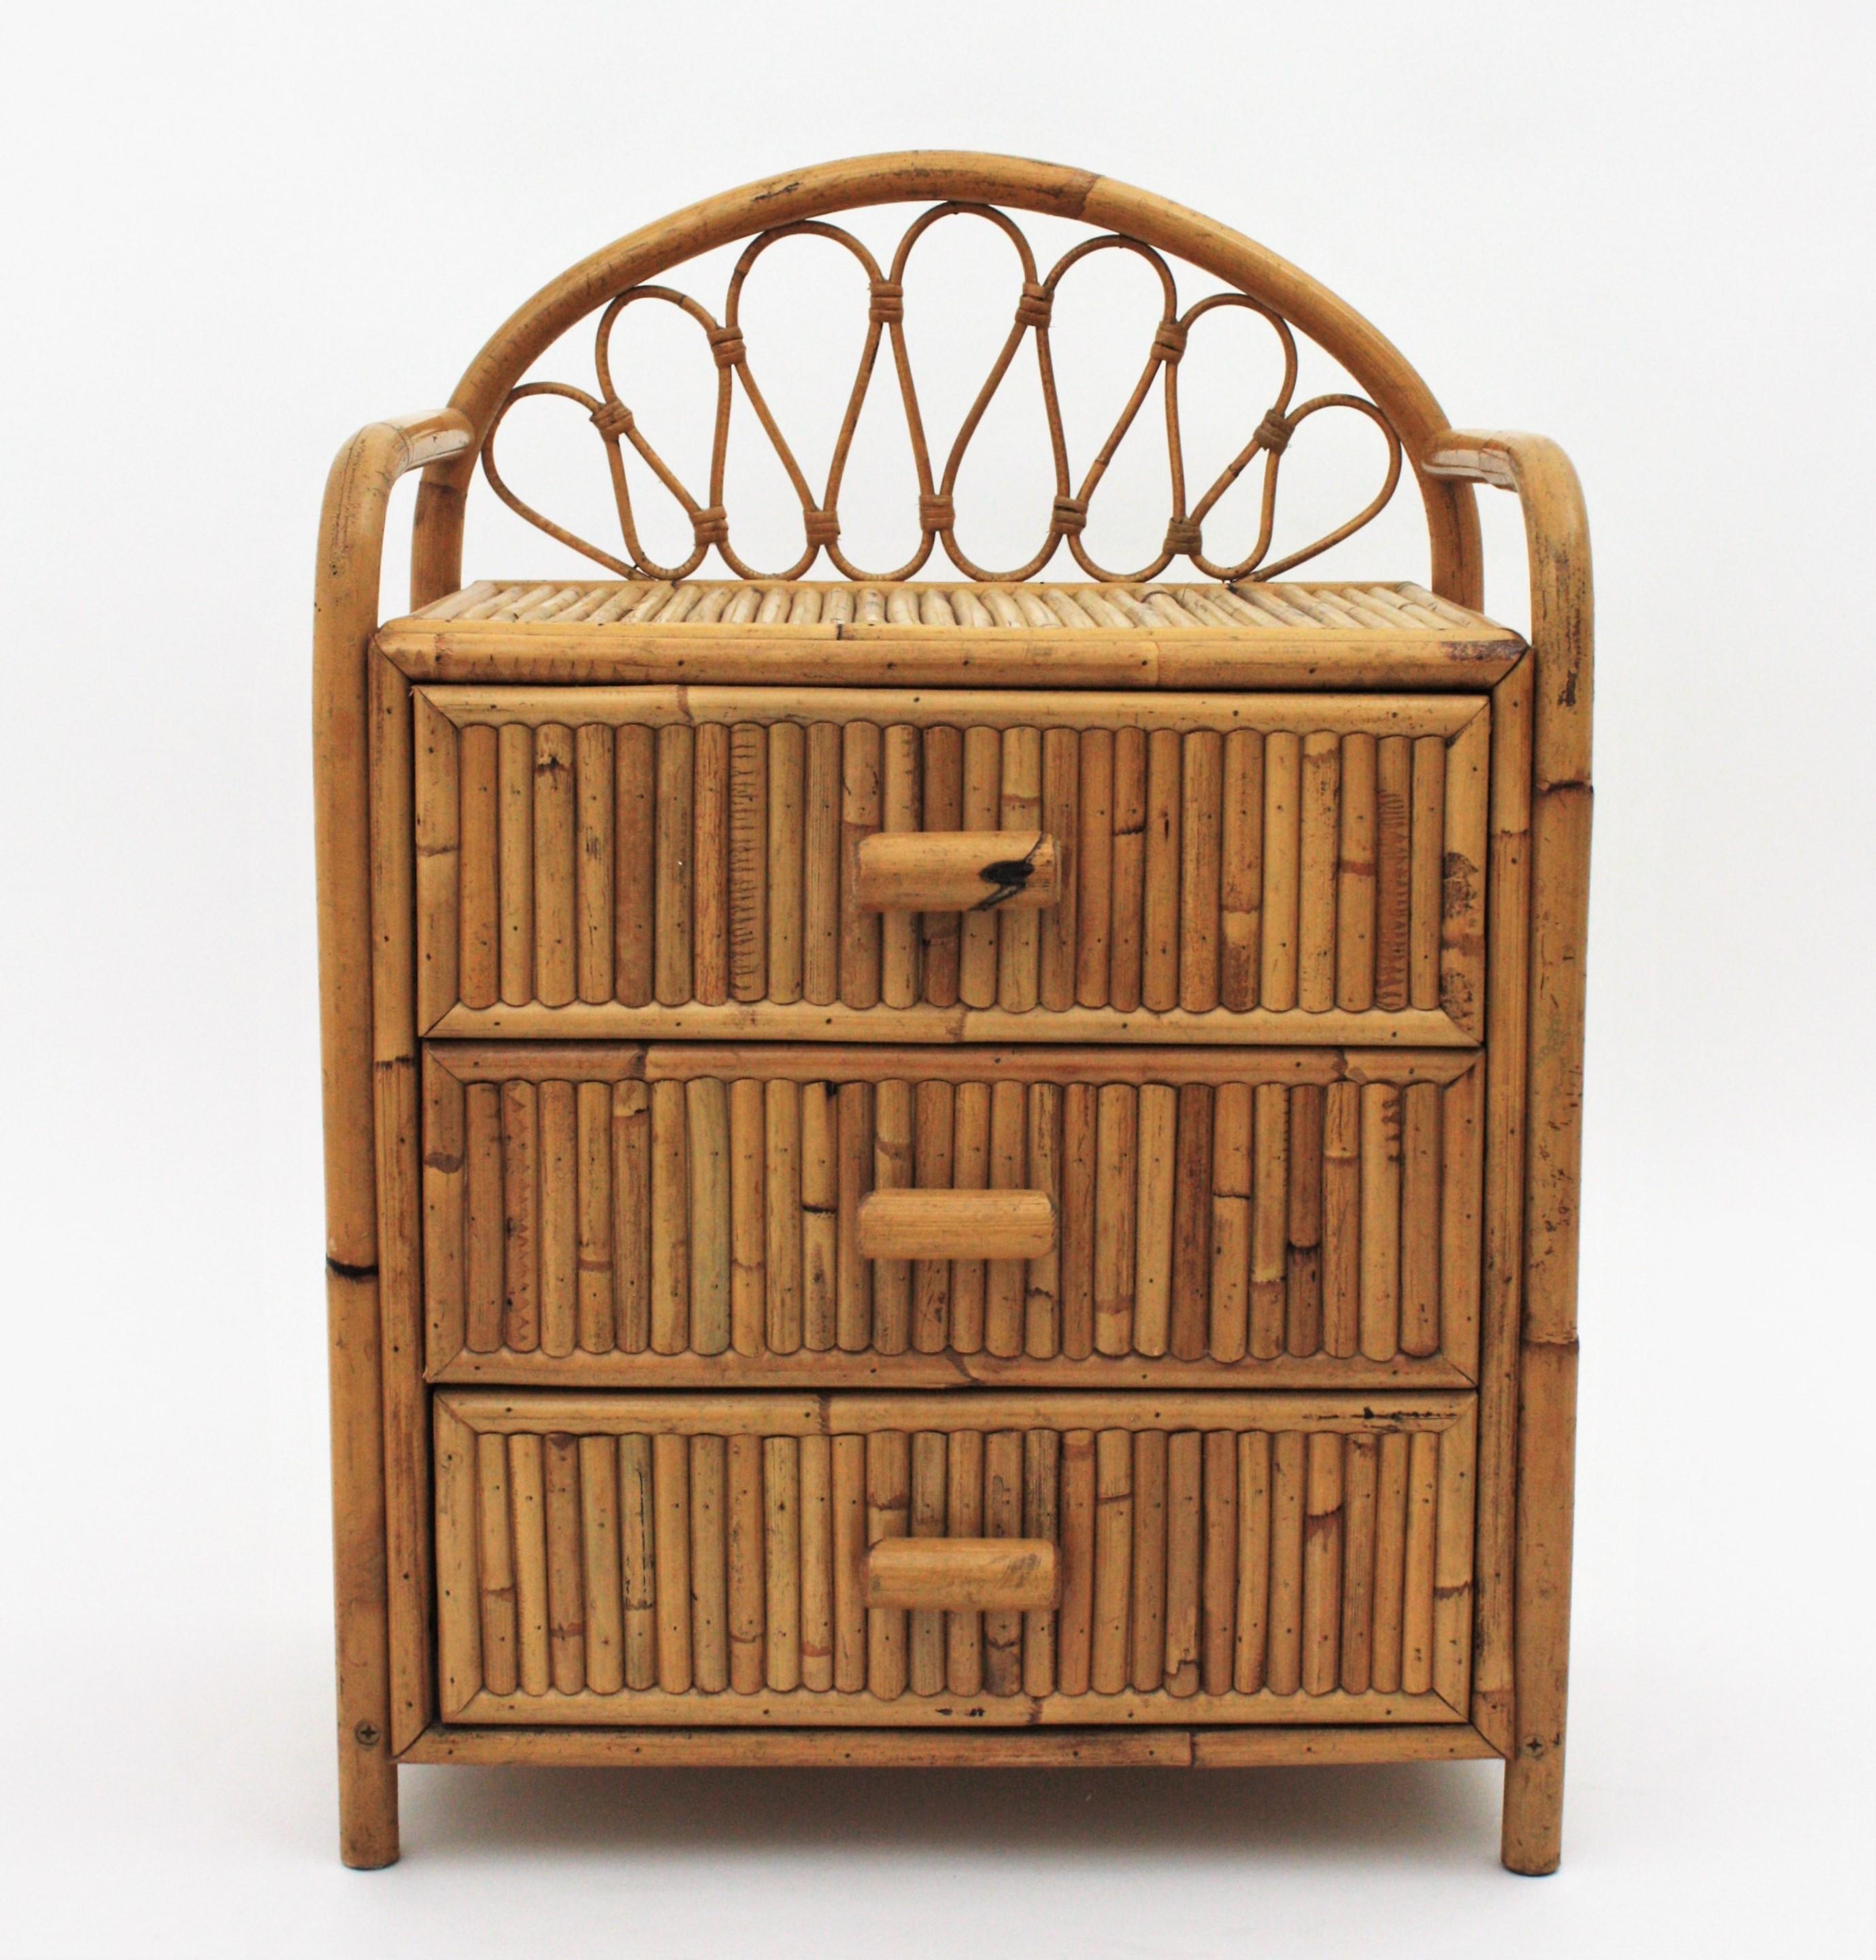 Spanish modern bamboo night stand or small chest with three drawers, Spain, 1970s 
Beautiful split reed bamboo and rattan small chest, end table or bedside table with a decorative crest.
This small chests have a wood and bamboo construction